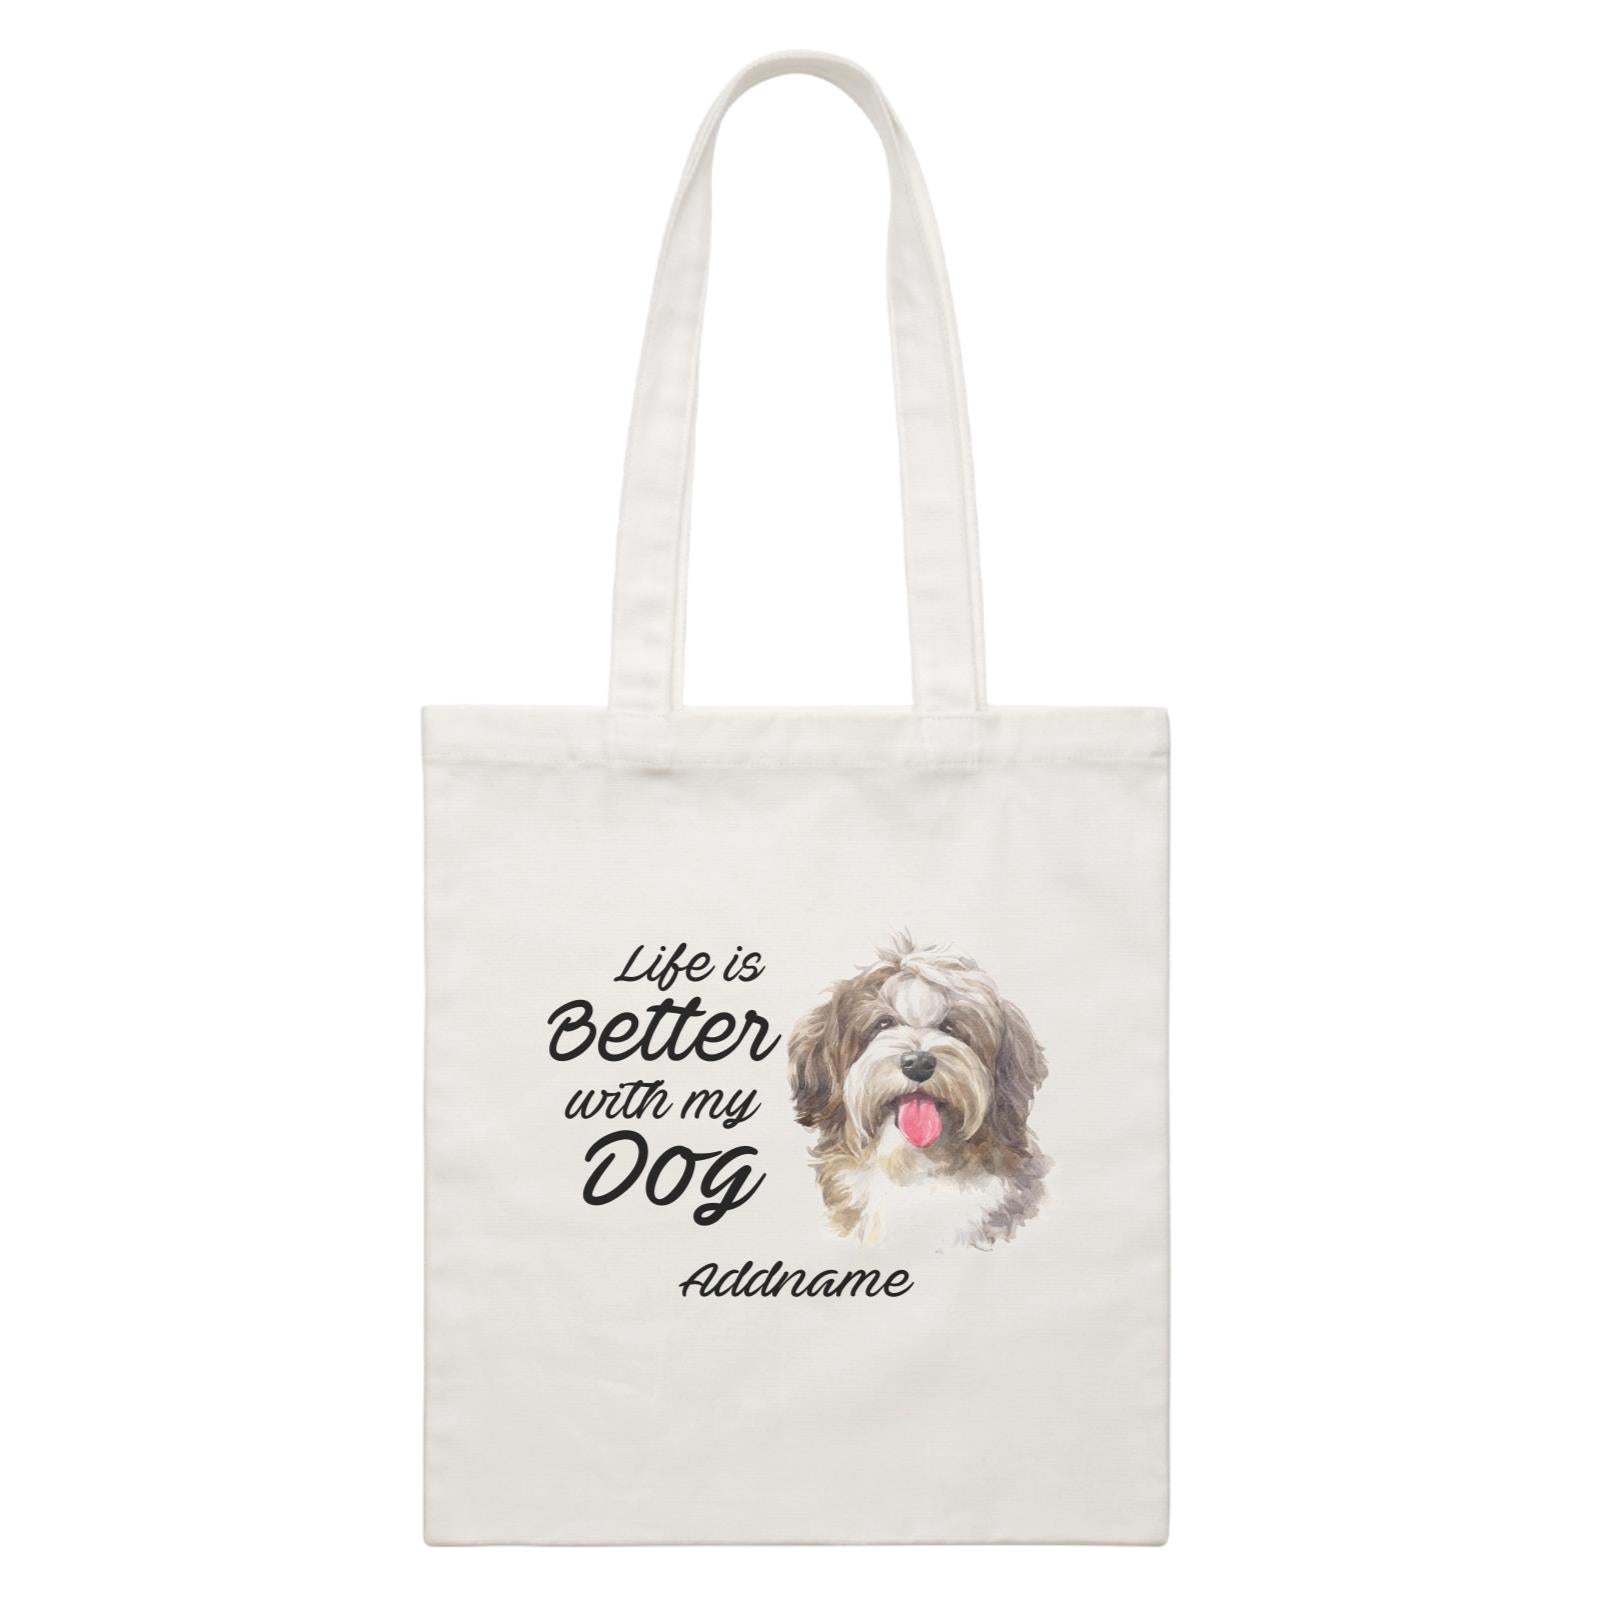 Watercolor Life is Better With My Dog Shaggy Havanese Addname White Canvas Bag